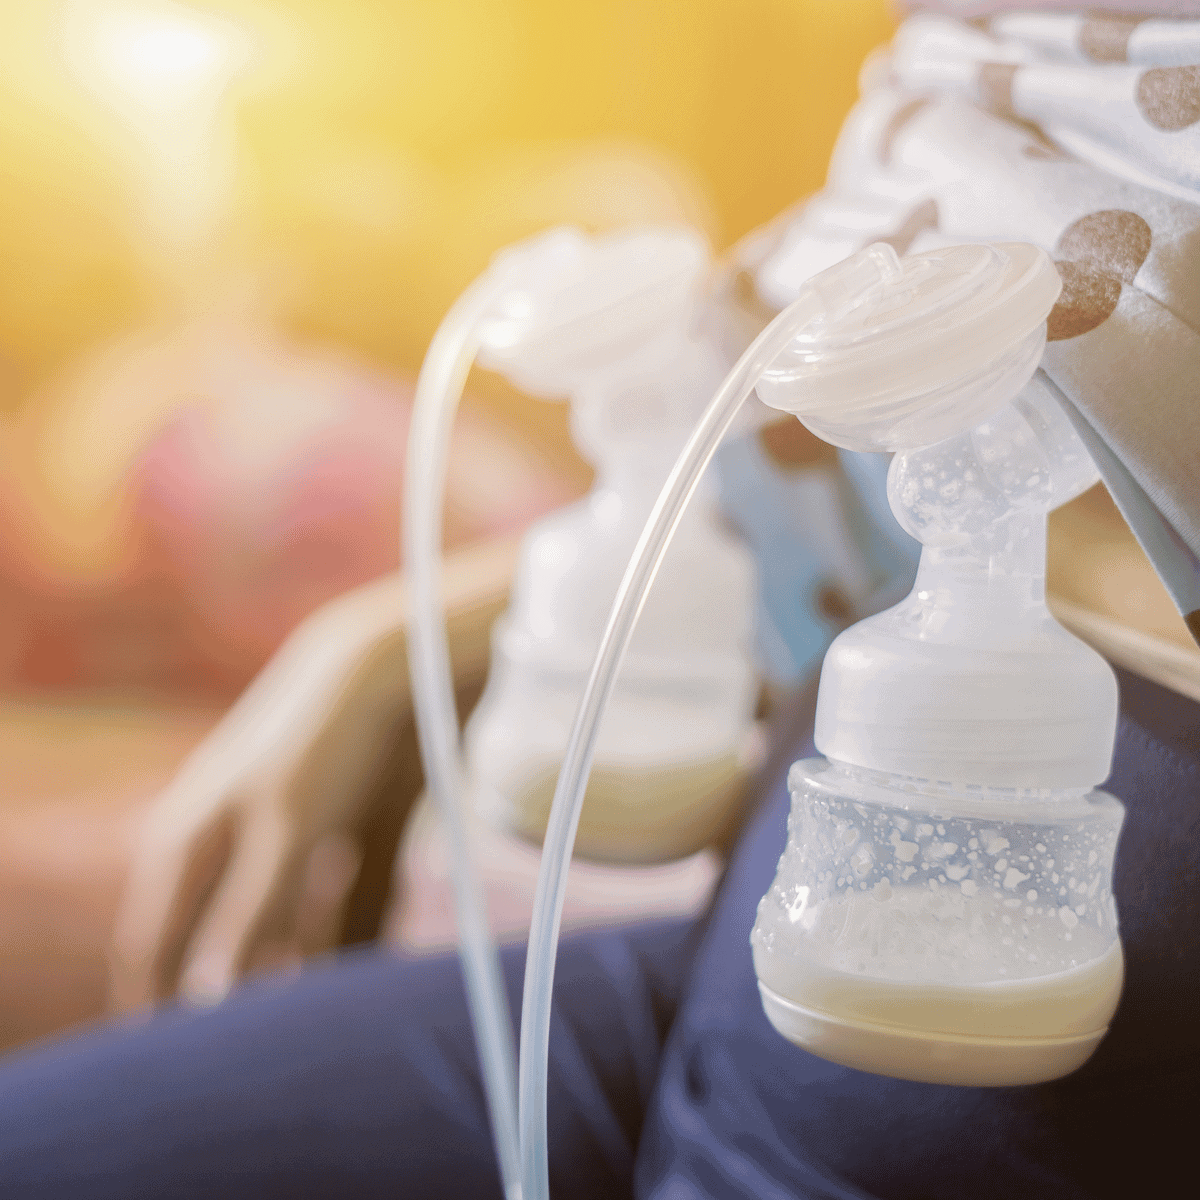 A close-up image of a breast pump in use. The pump is attached to a person who is out of focus in the background. Milk can be seen collecting in the attached bottle, signifying the process of expressing breast milk. The environment is warm with a soft light that suggests a comfortable and private setting for pumping.